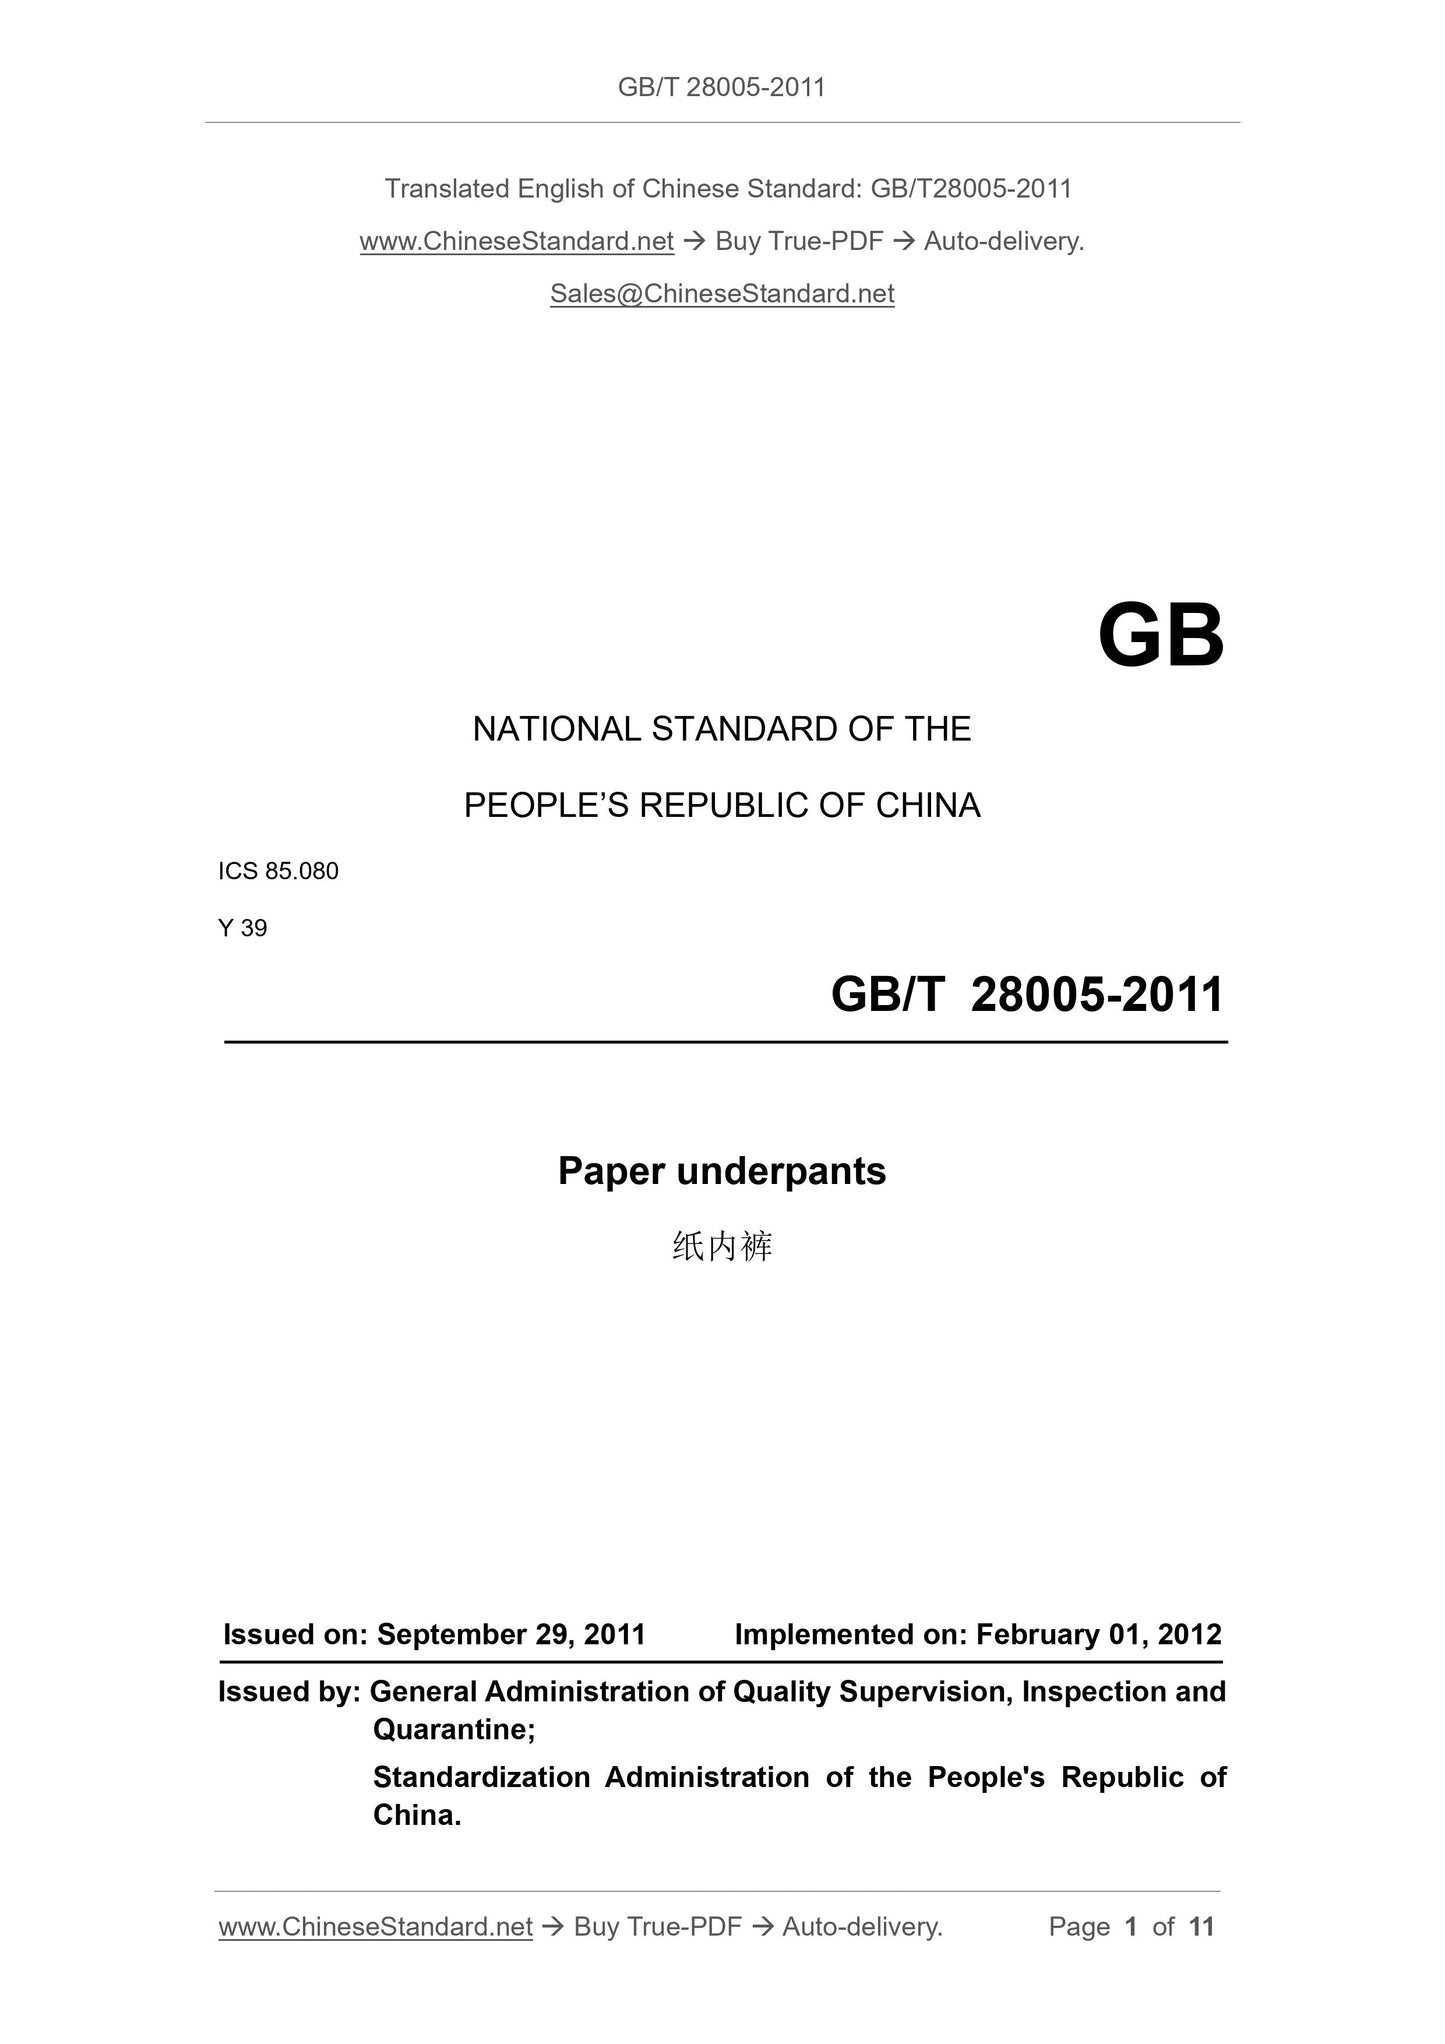 GB/T 28005-2011 Page 1